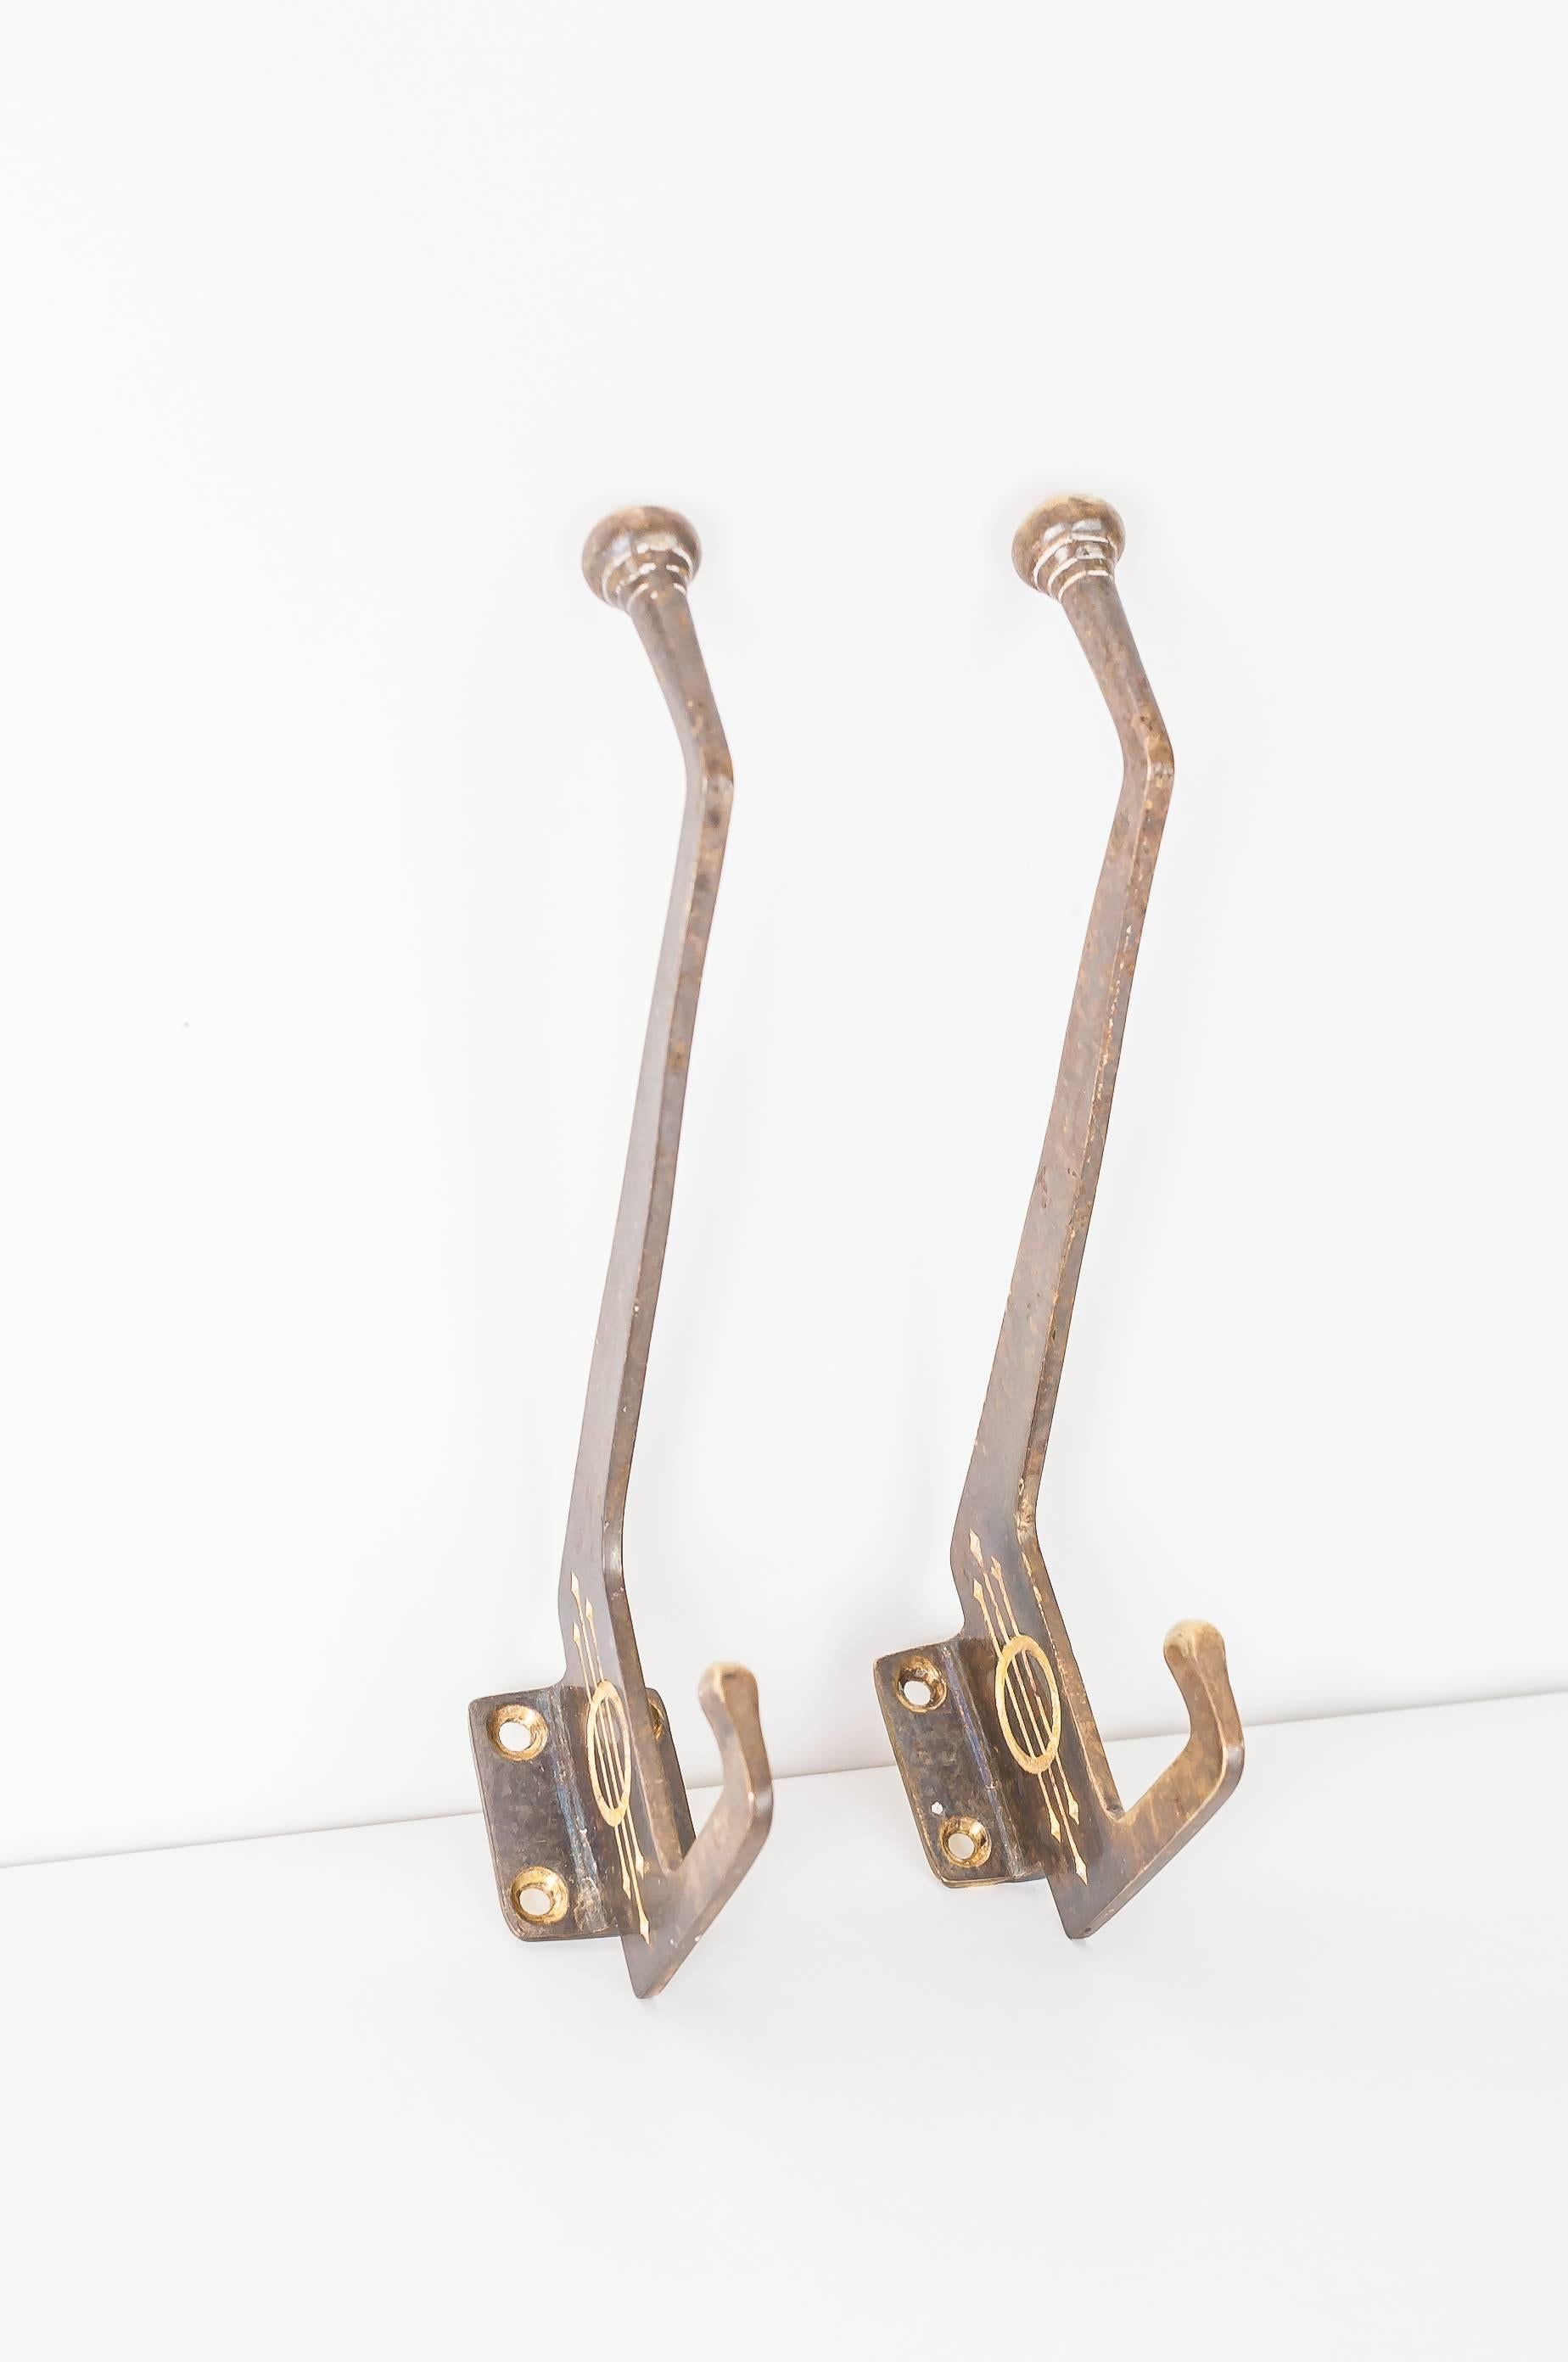 Early 20th Century Two Jugendstil Wall Hooks, circa 1908